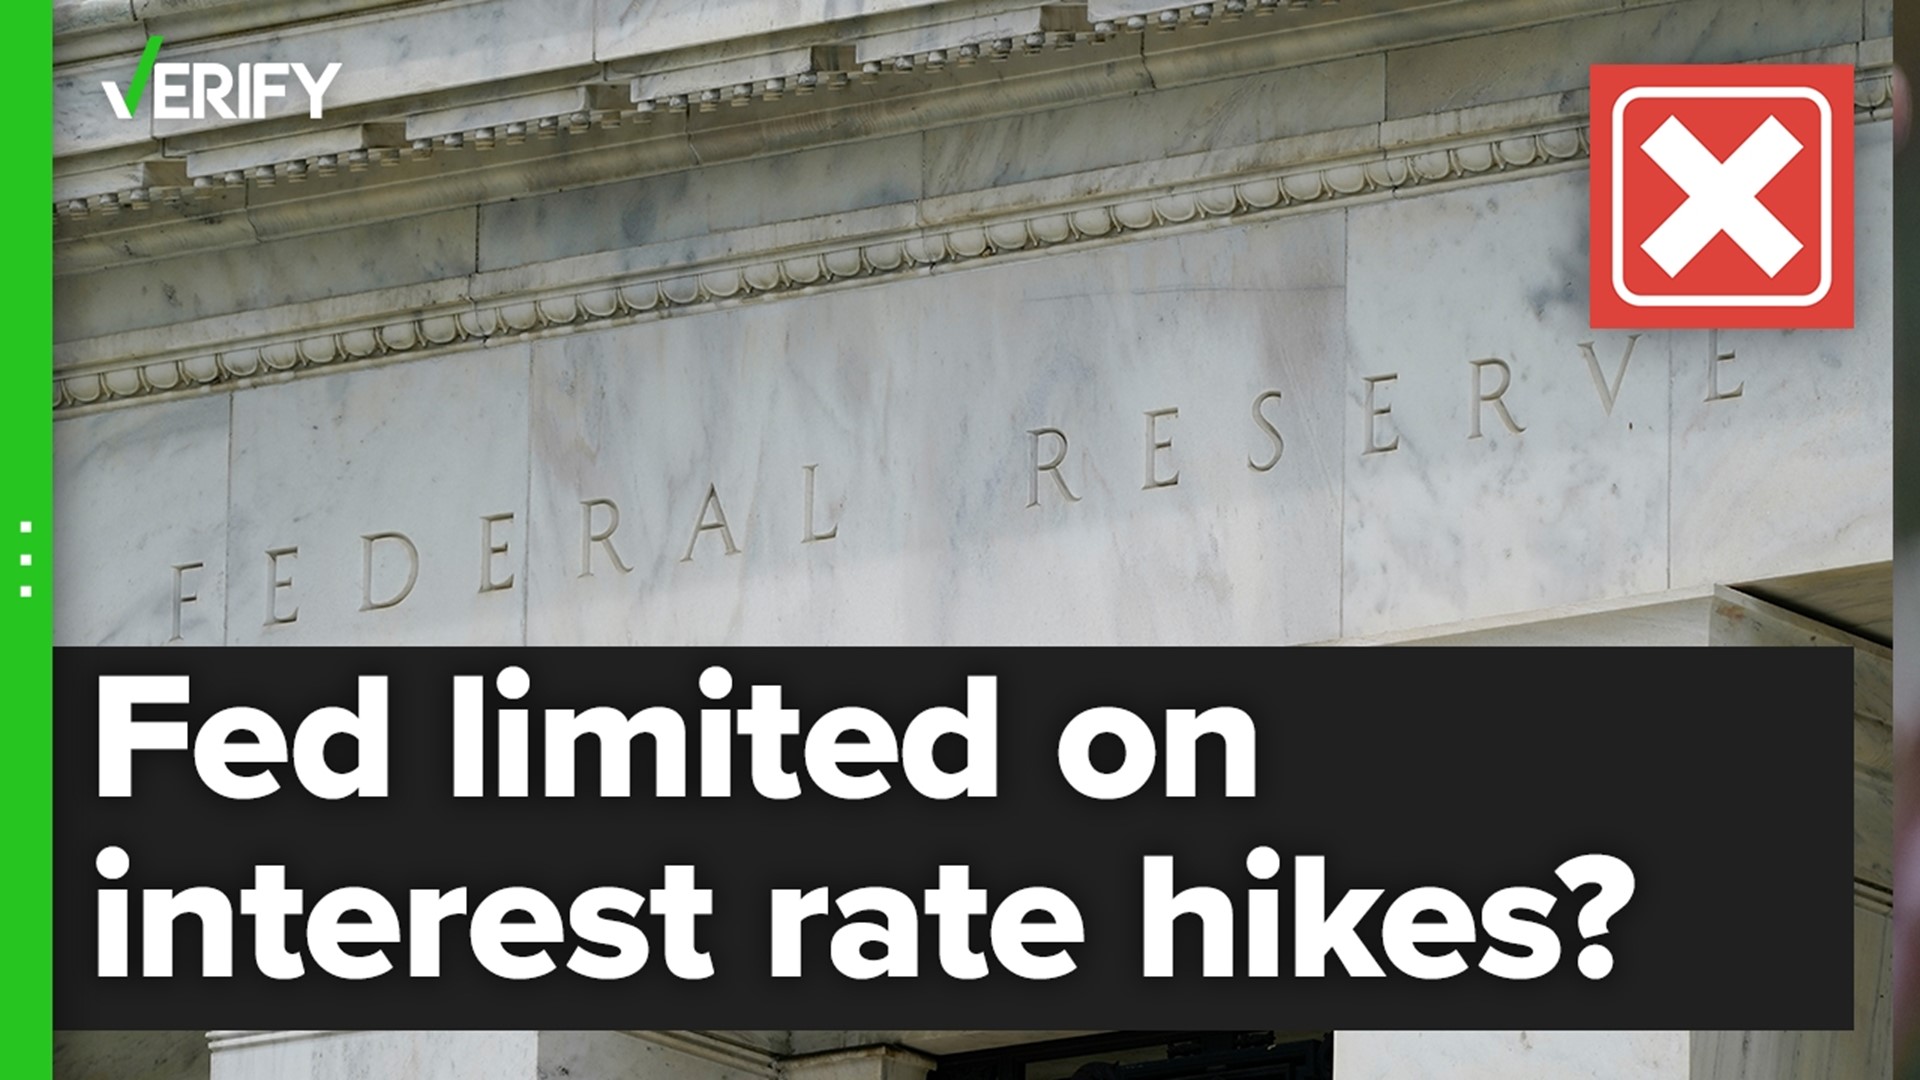 The Federal Reserve can raise rates as many times as needed in an effort to help solve problems that the U.S. economy faces, such as inflation, experts told VERIFY.